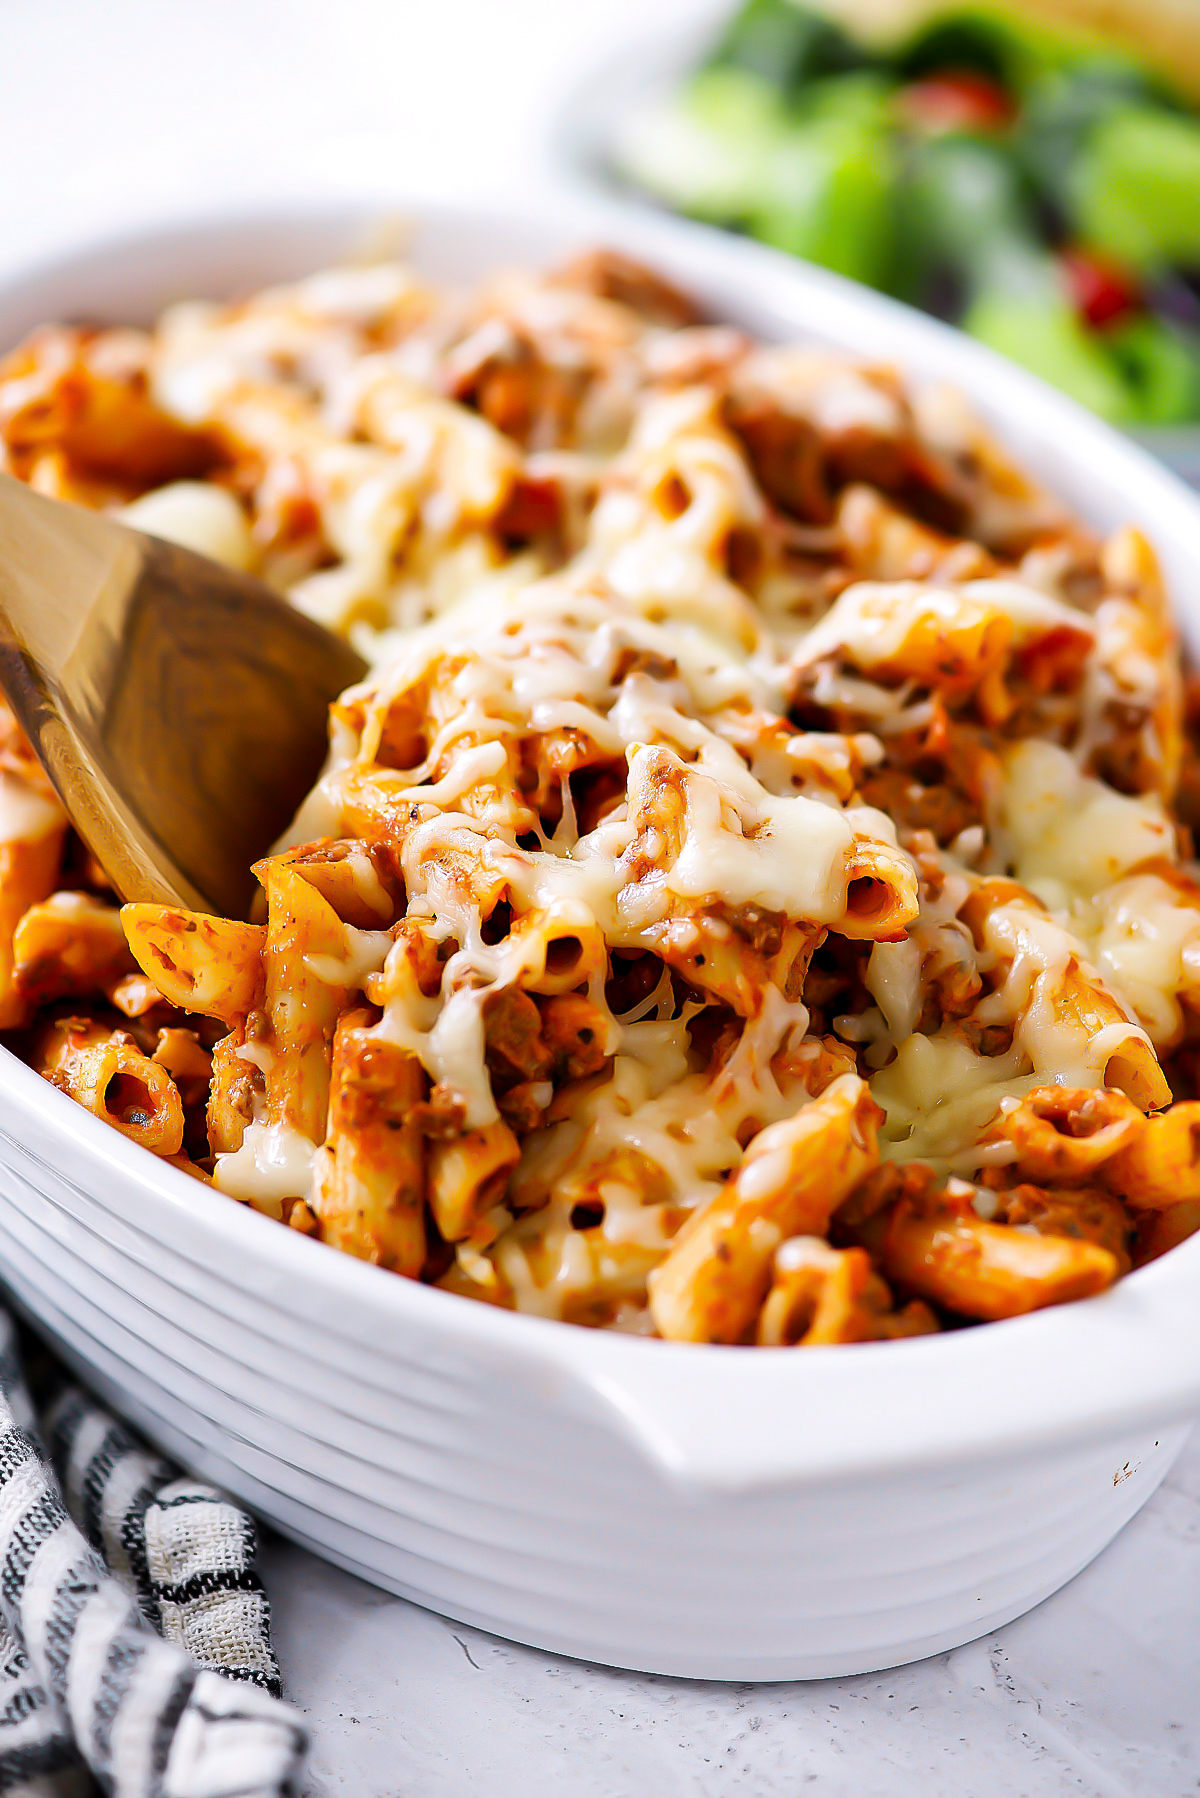 Baked Penne is a classic Italian-American dish with penne pasta baked in spaghetti sauce, cream cheese and Mozzarella cheese. Life-in-the-Lofthouse.com